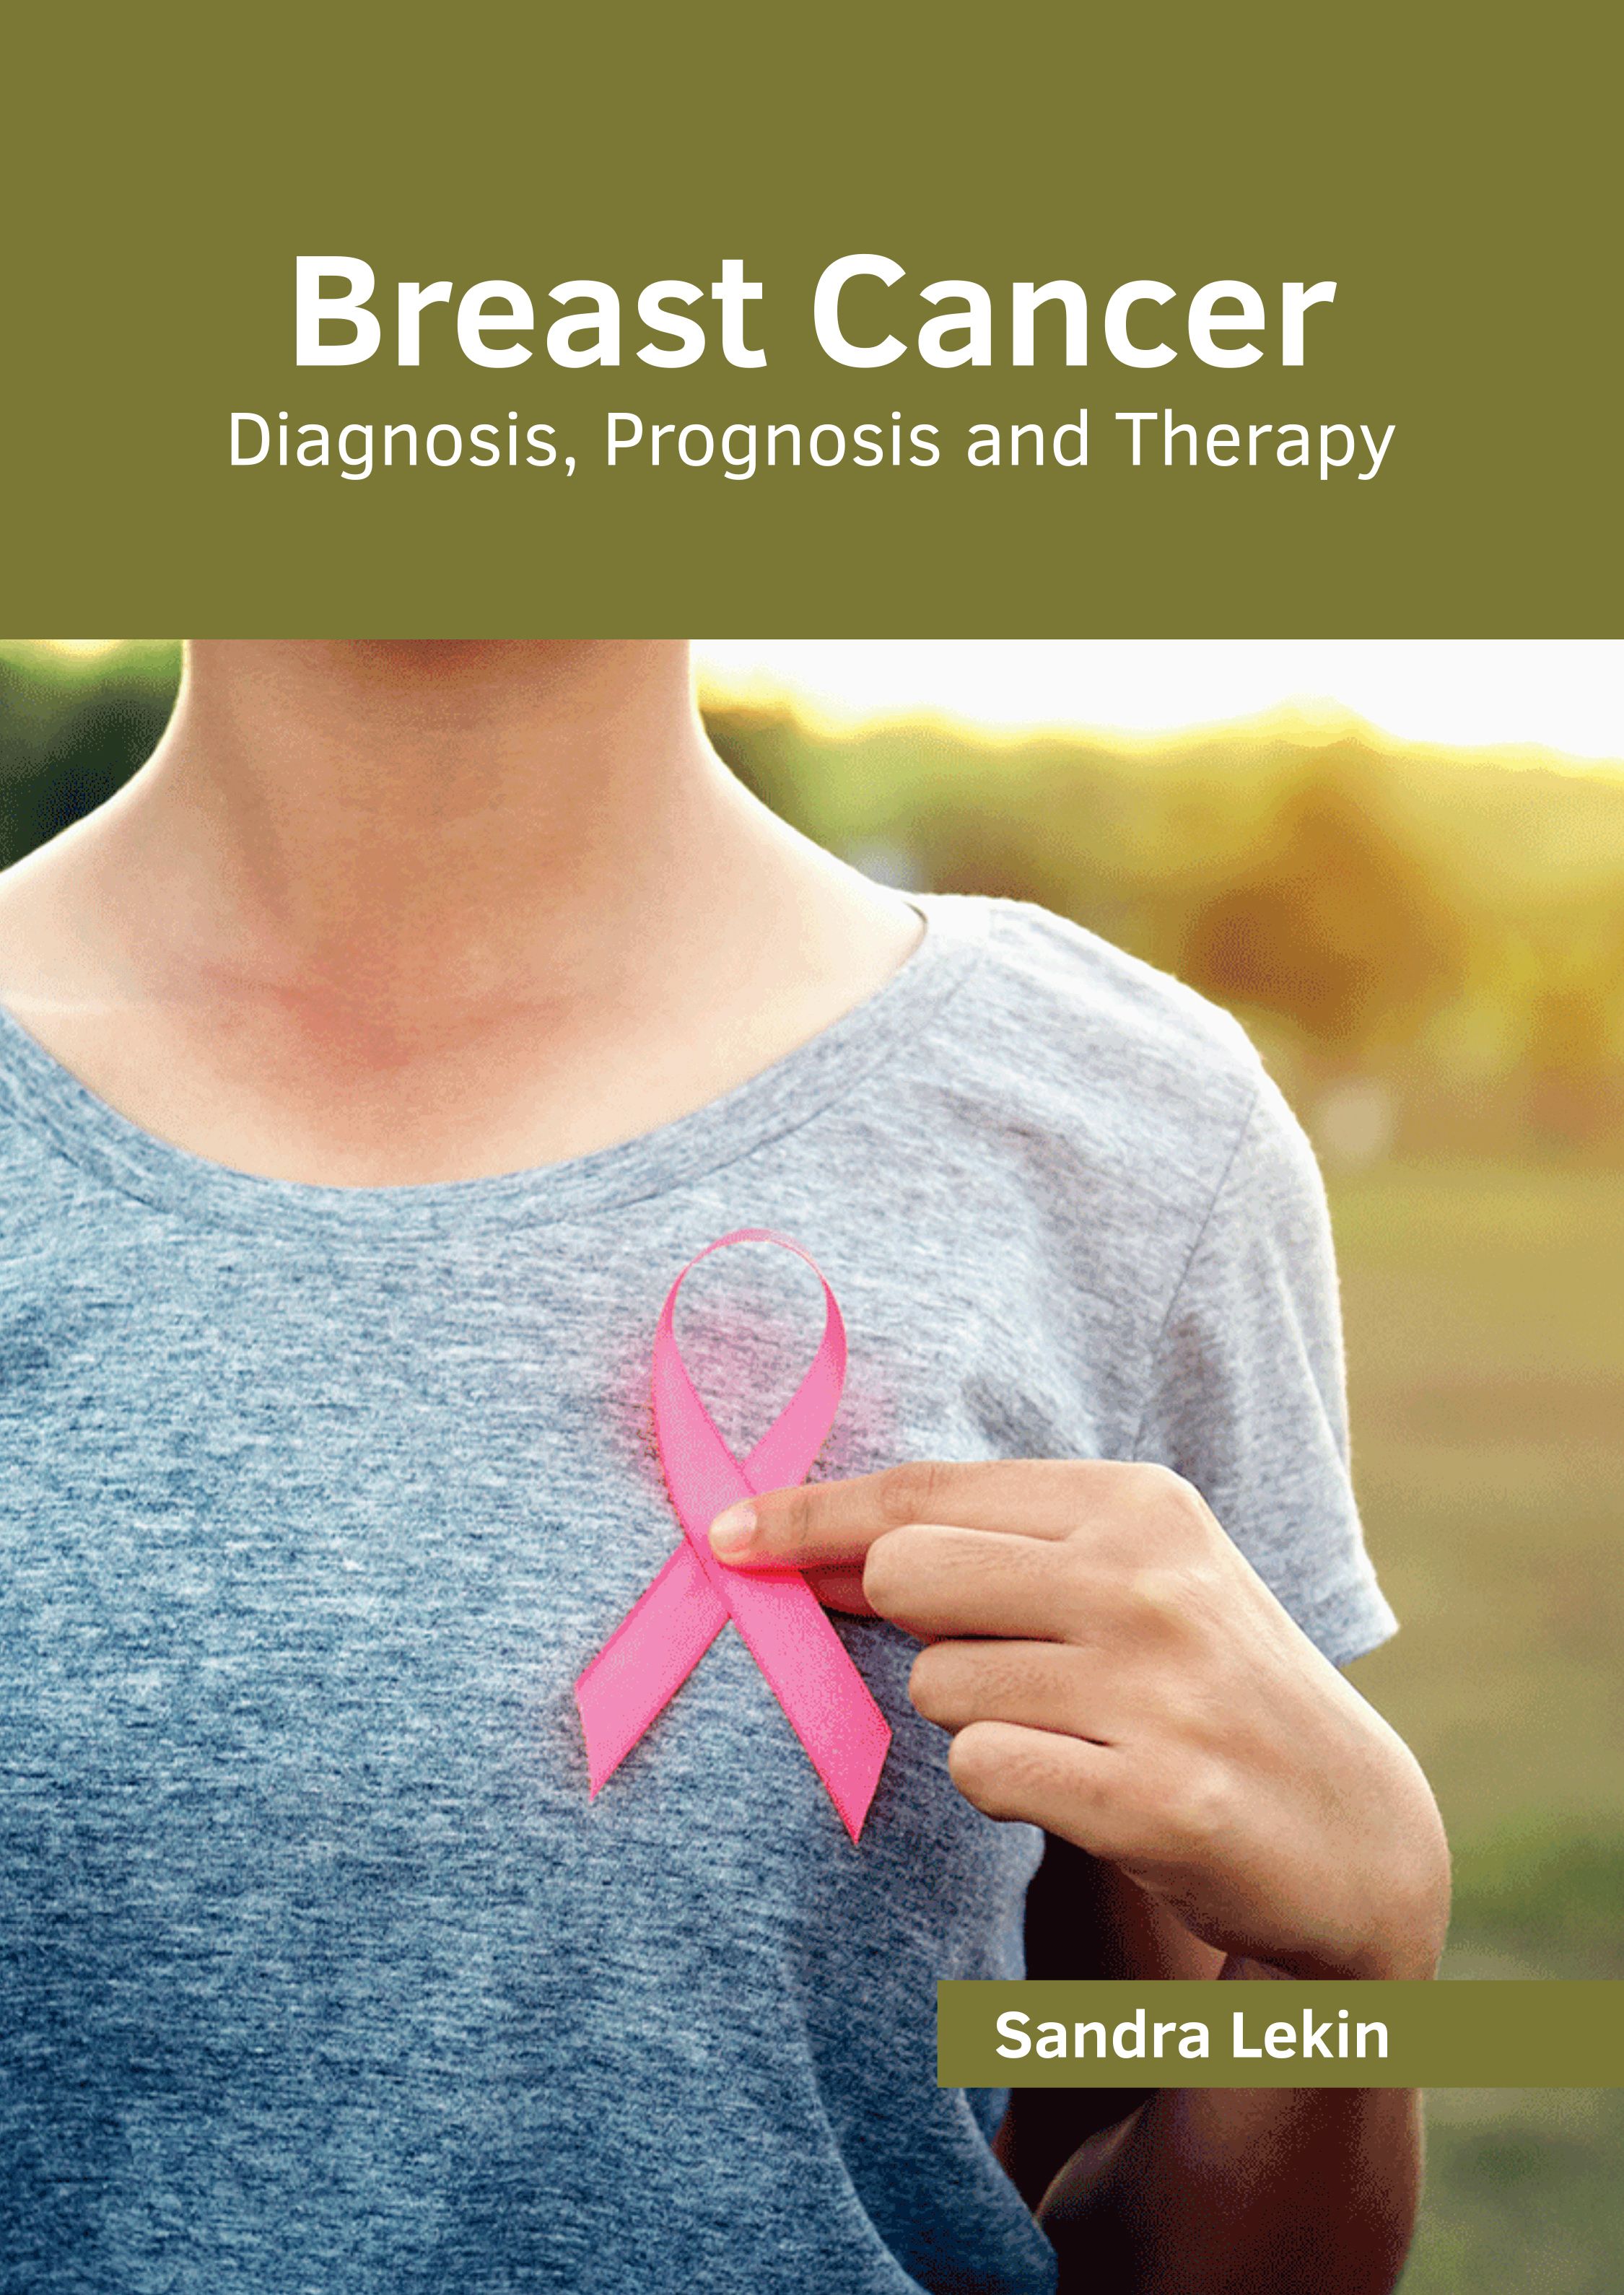 BREAST CANCER: DIAGNOSIS, PROGNOSIS AND THERAPY